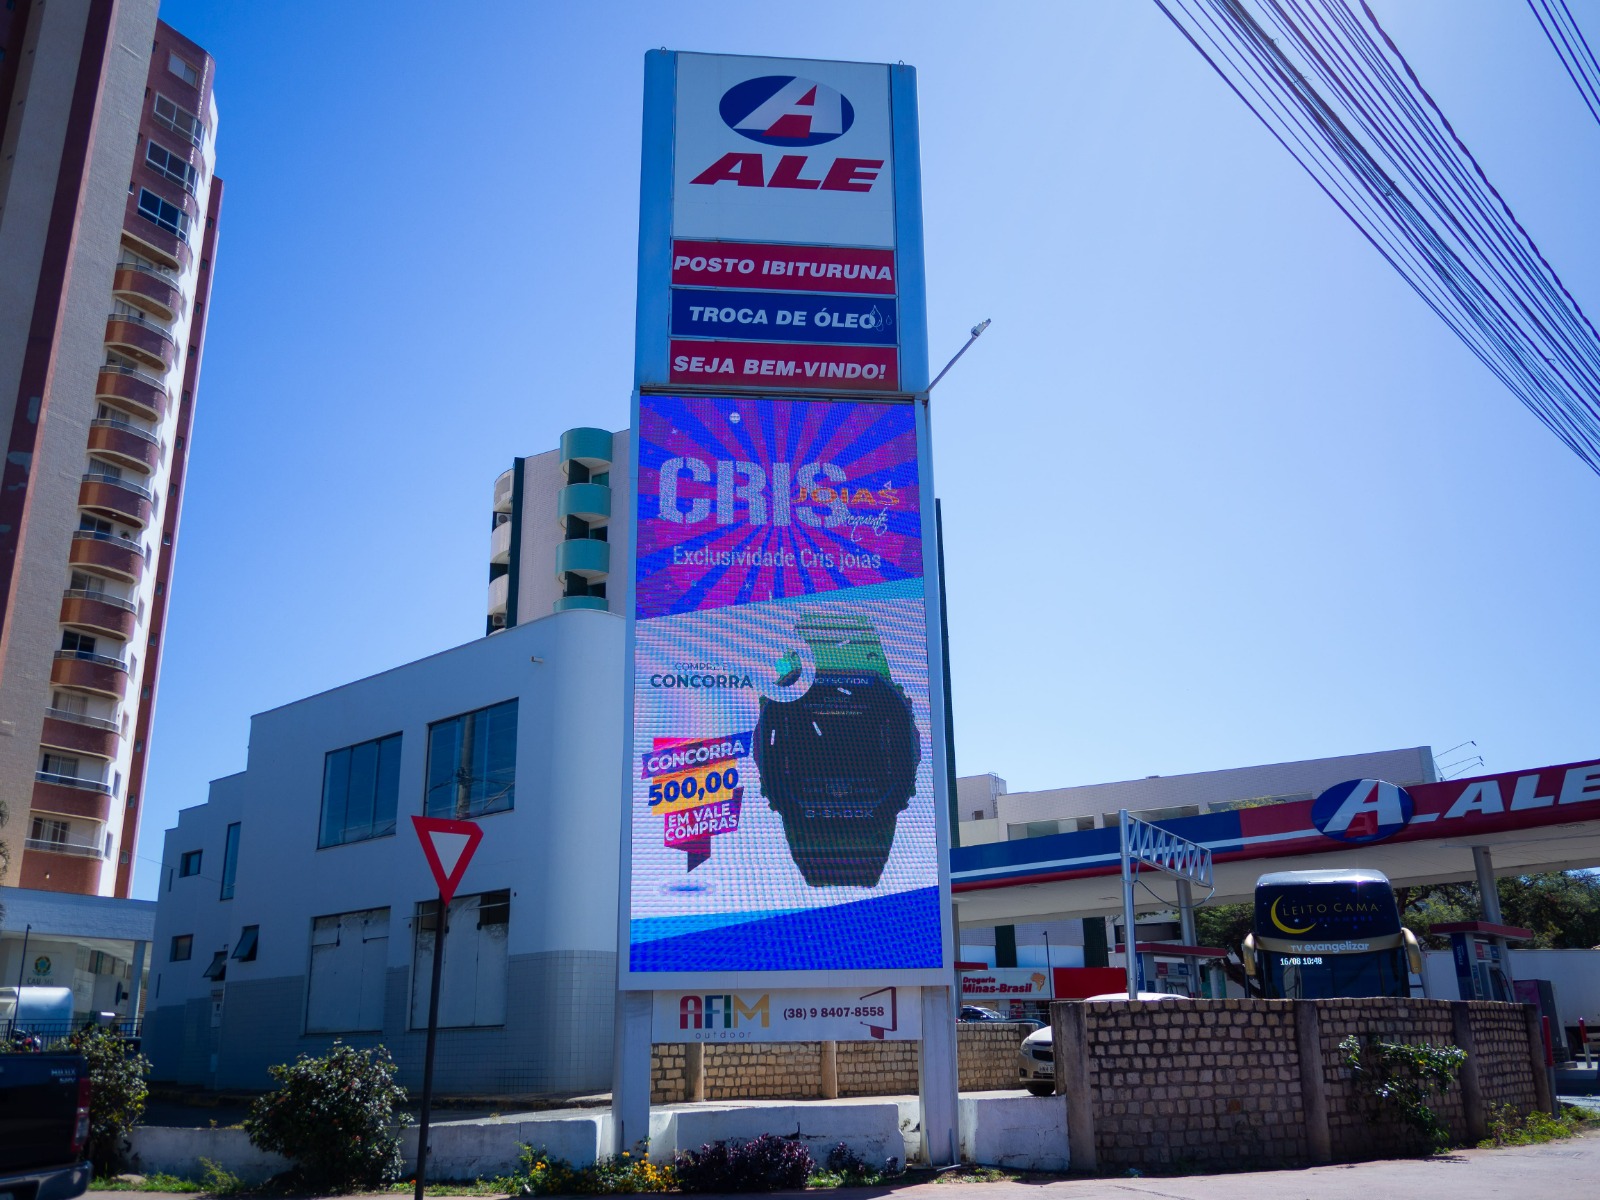 lp-postos-led-expert-paineis-painel-led-midia-dooh-publicidade-digital-out-of-home-indoor-outdoor-rental-12